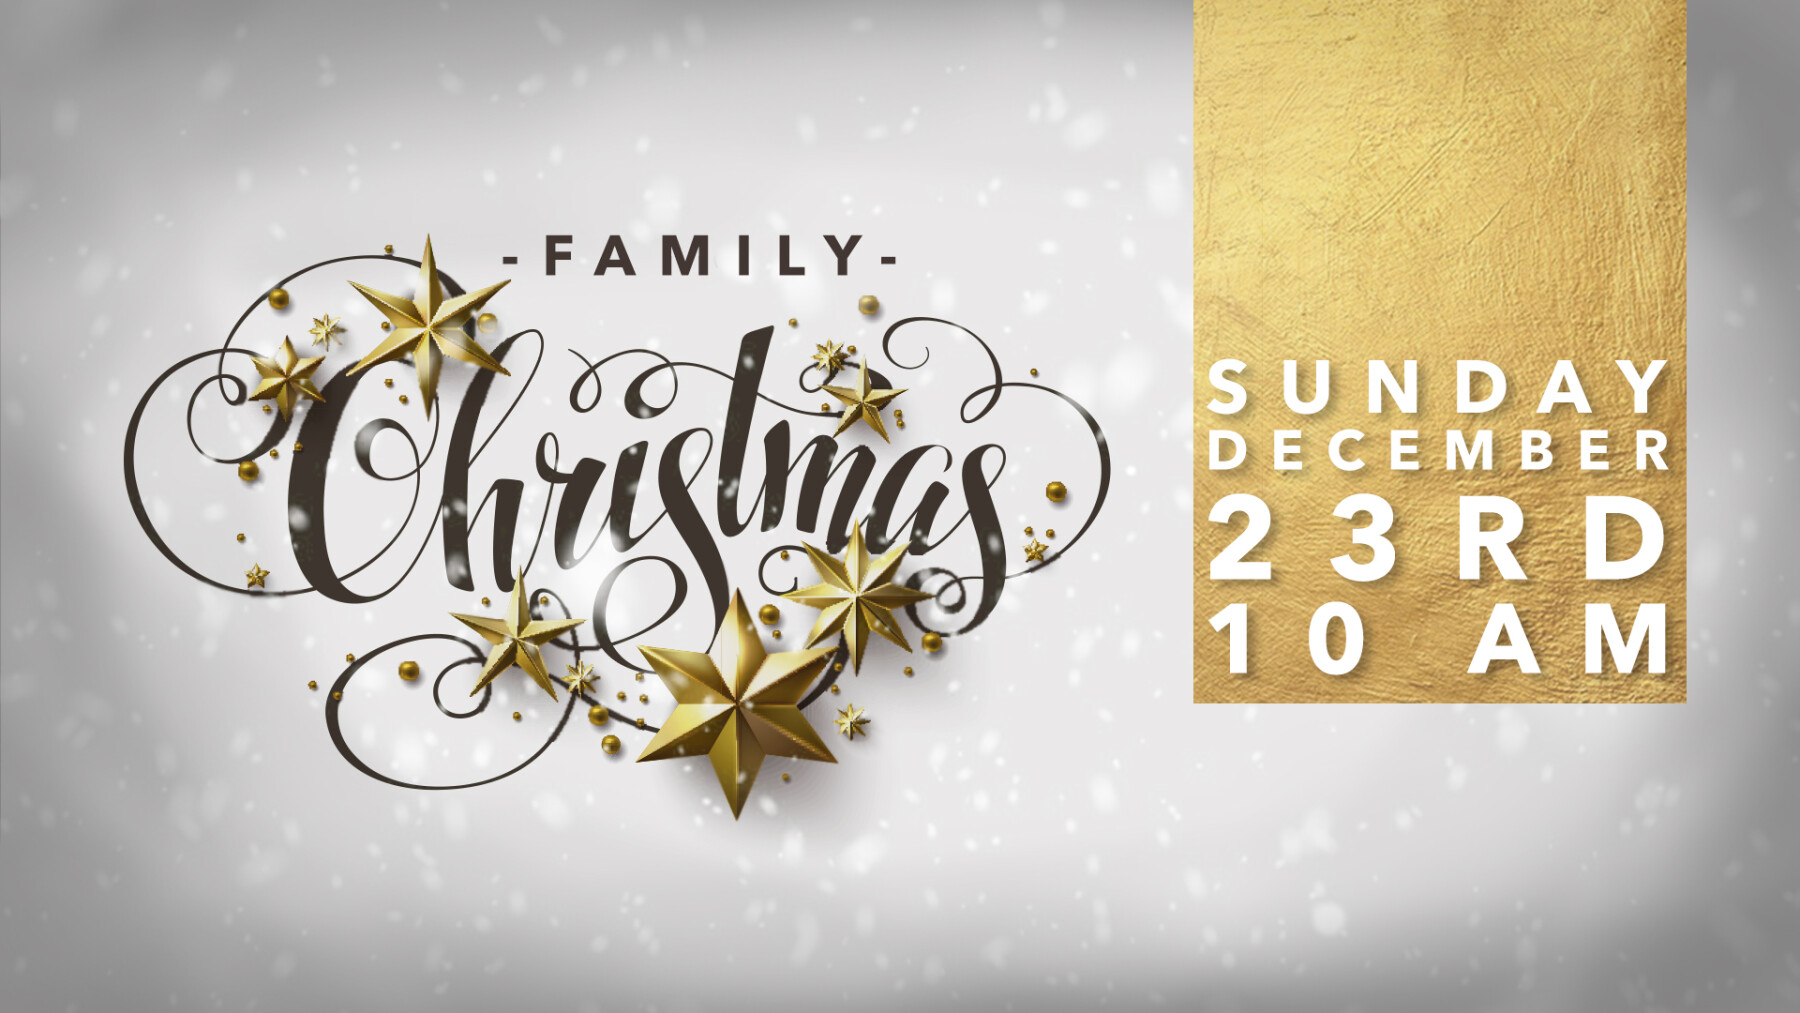 Special Christmas Family Service 